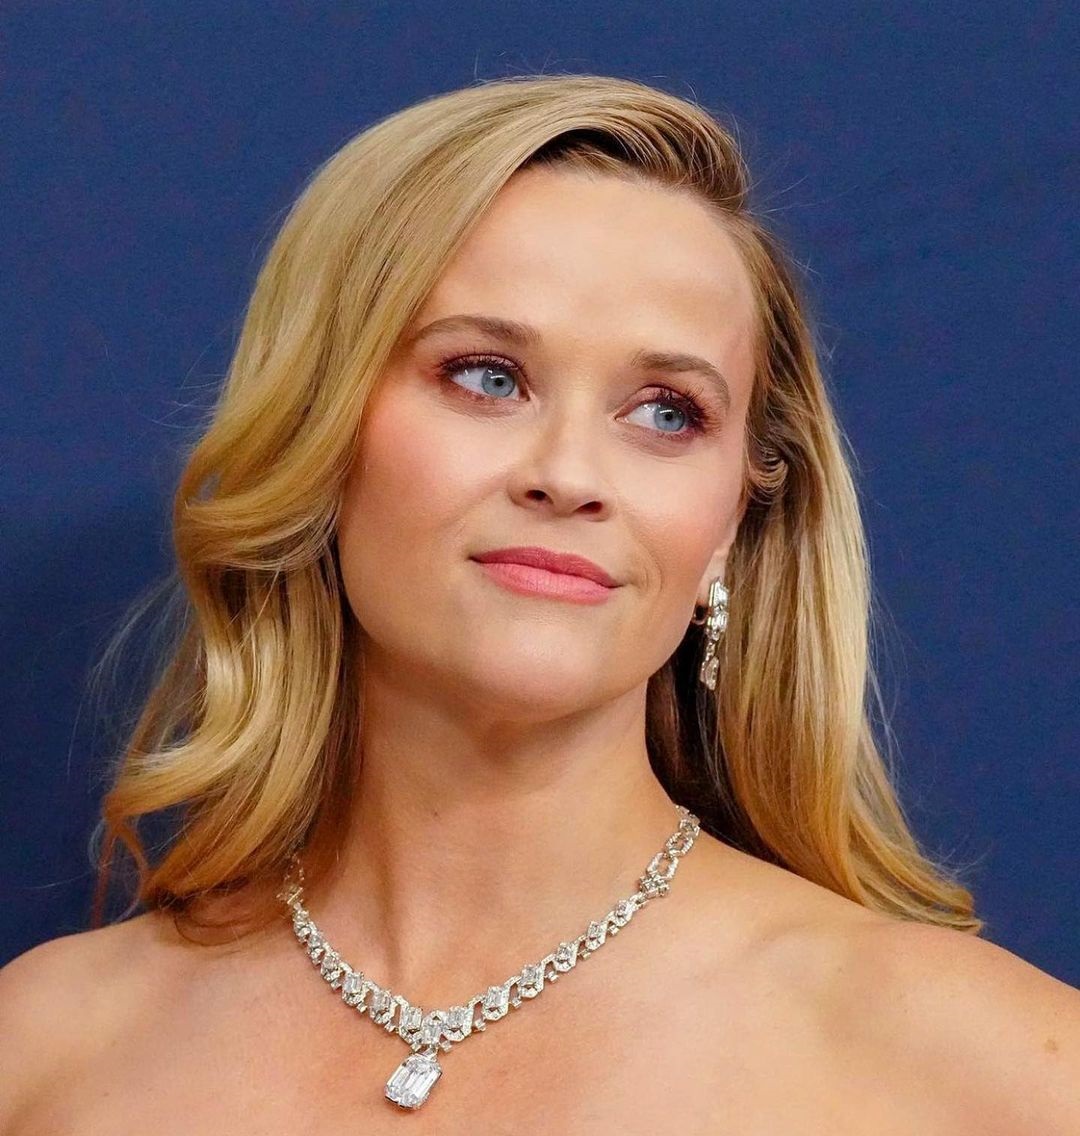 Reese witherspoon 24 hottest pics, reese witherspoon 24 instagram